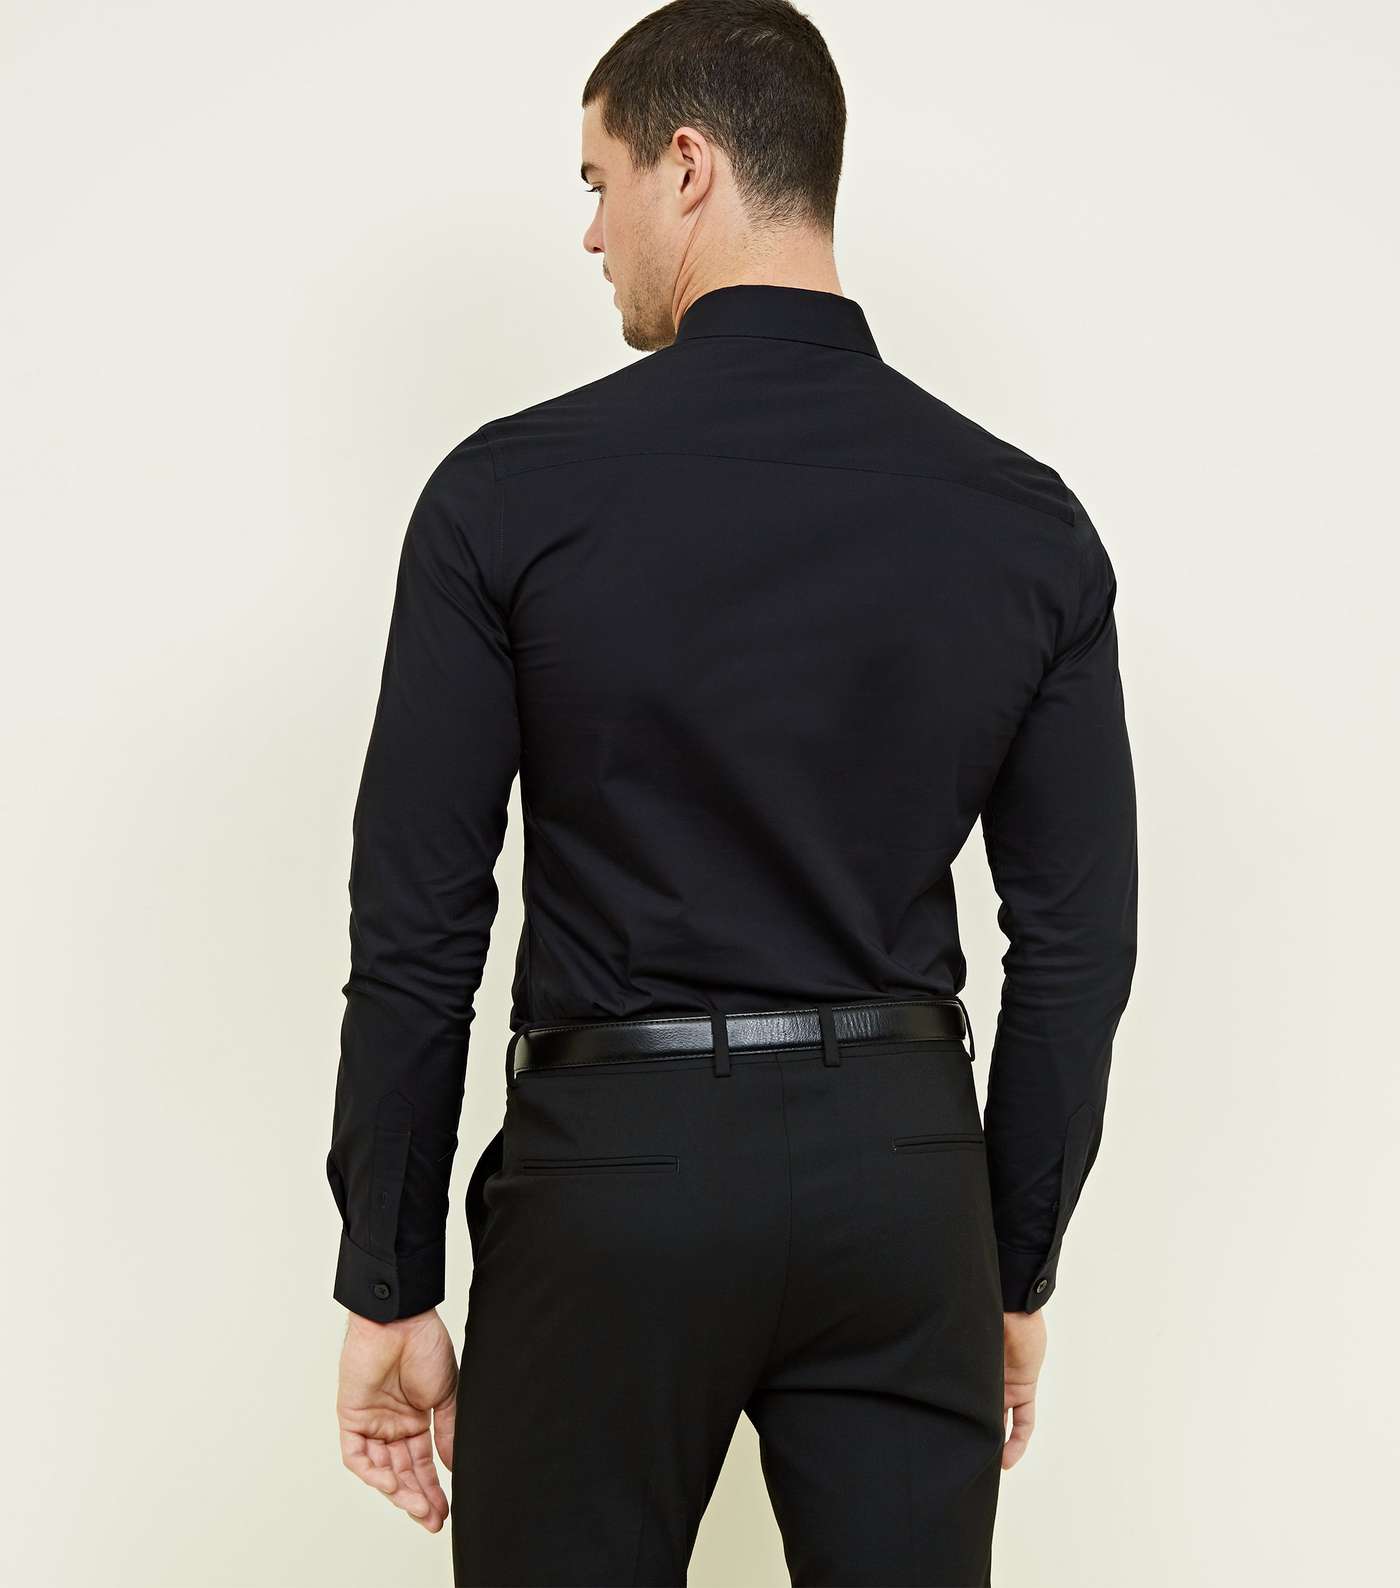 Black Long Sleeve Muscle Fit Shirt Image 3